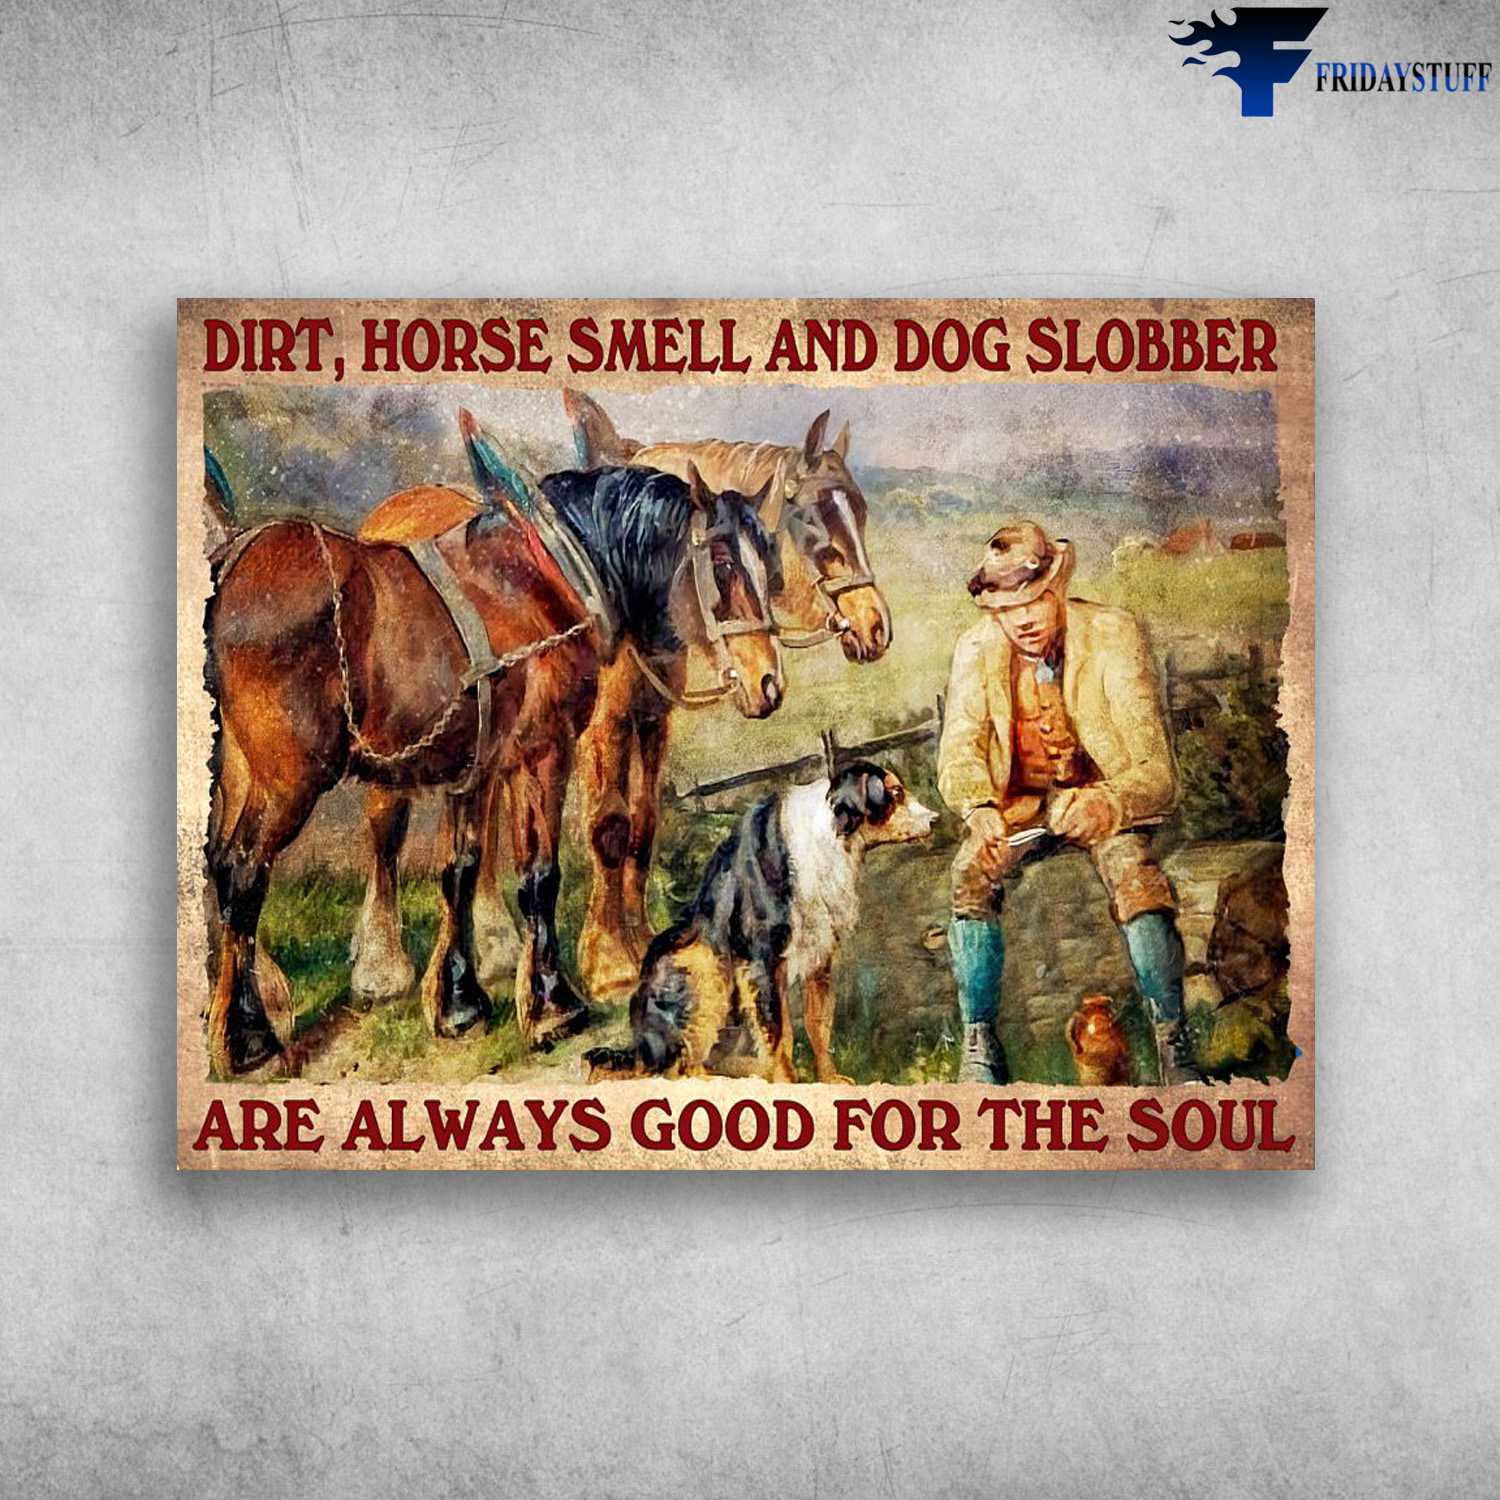 Horse And Dog, Dog Lover - Dirt, Horse Smell And Dog Slobber, Are Always Good For The Soul